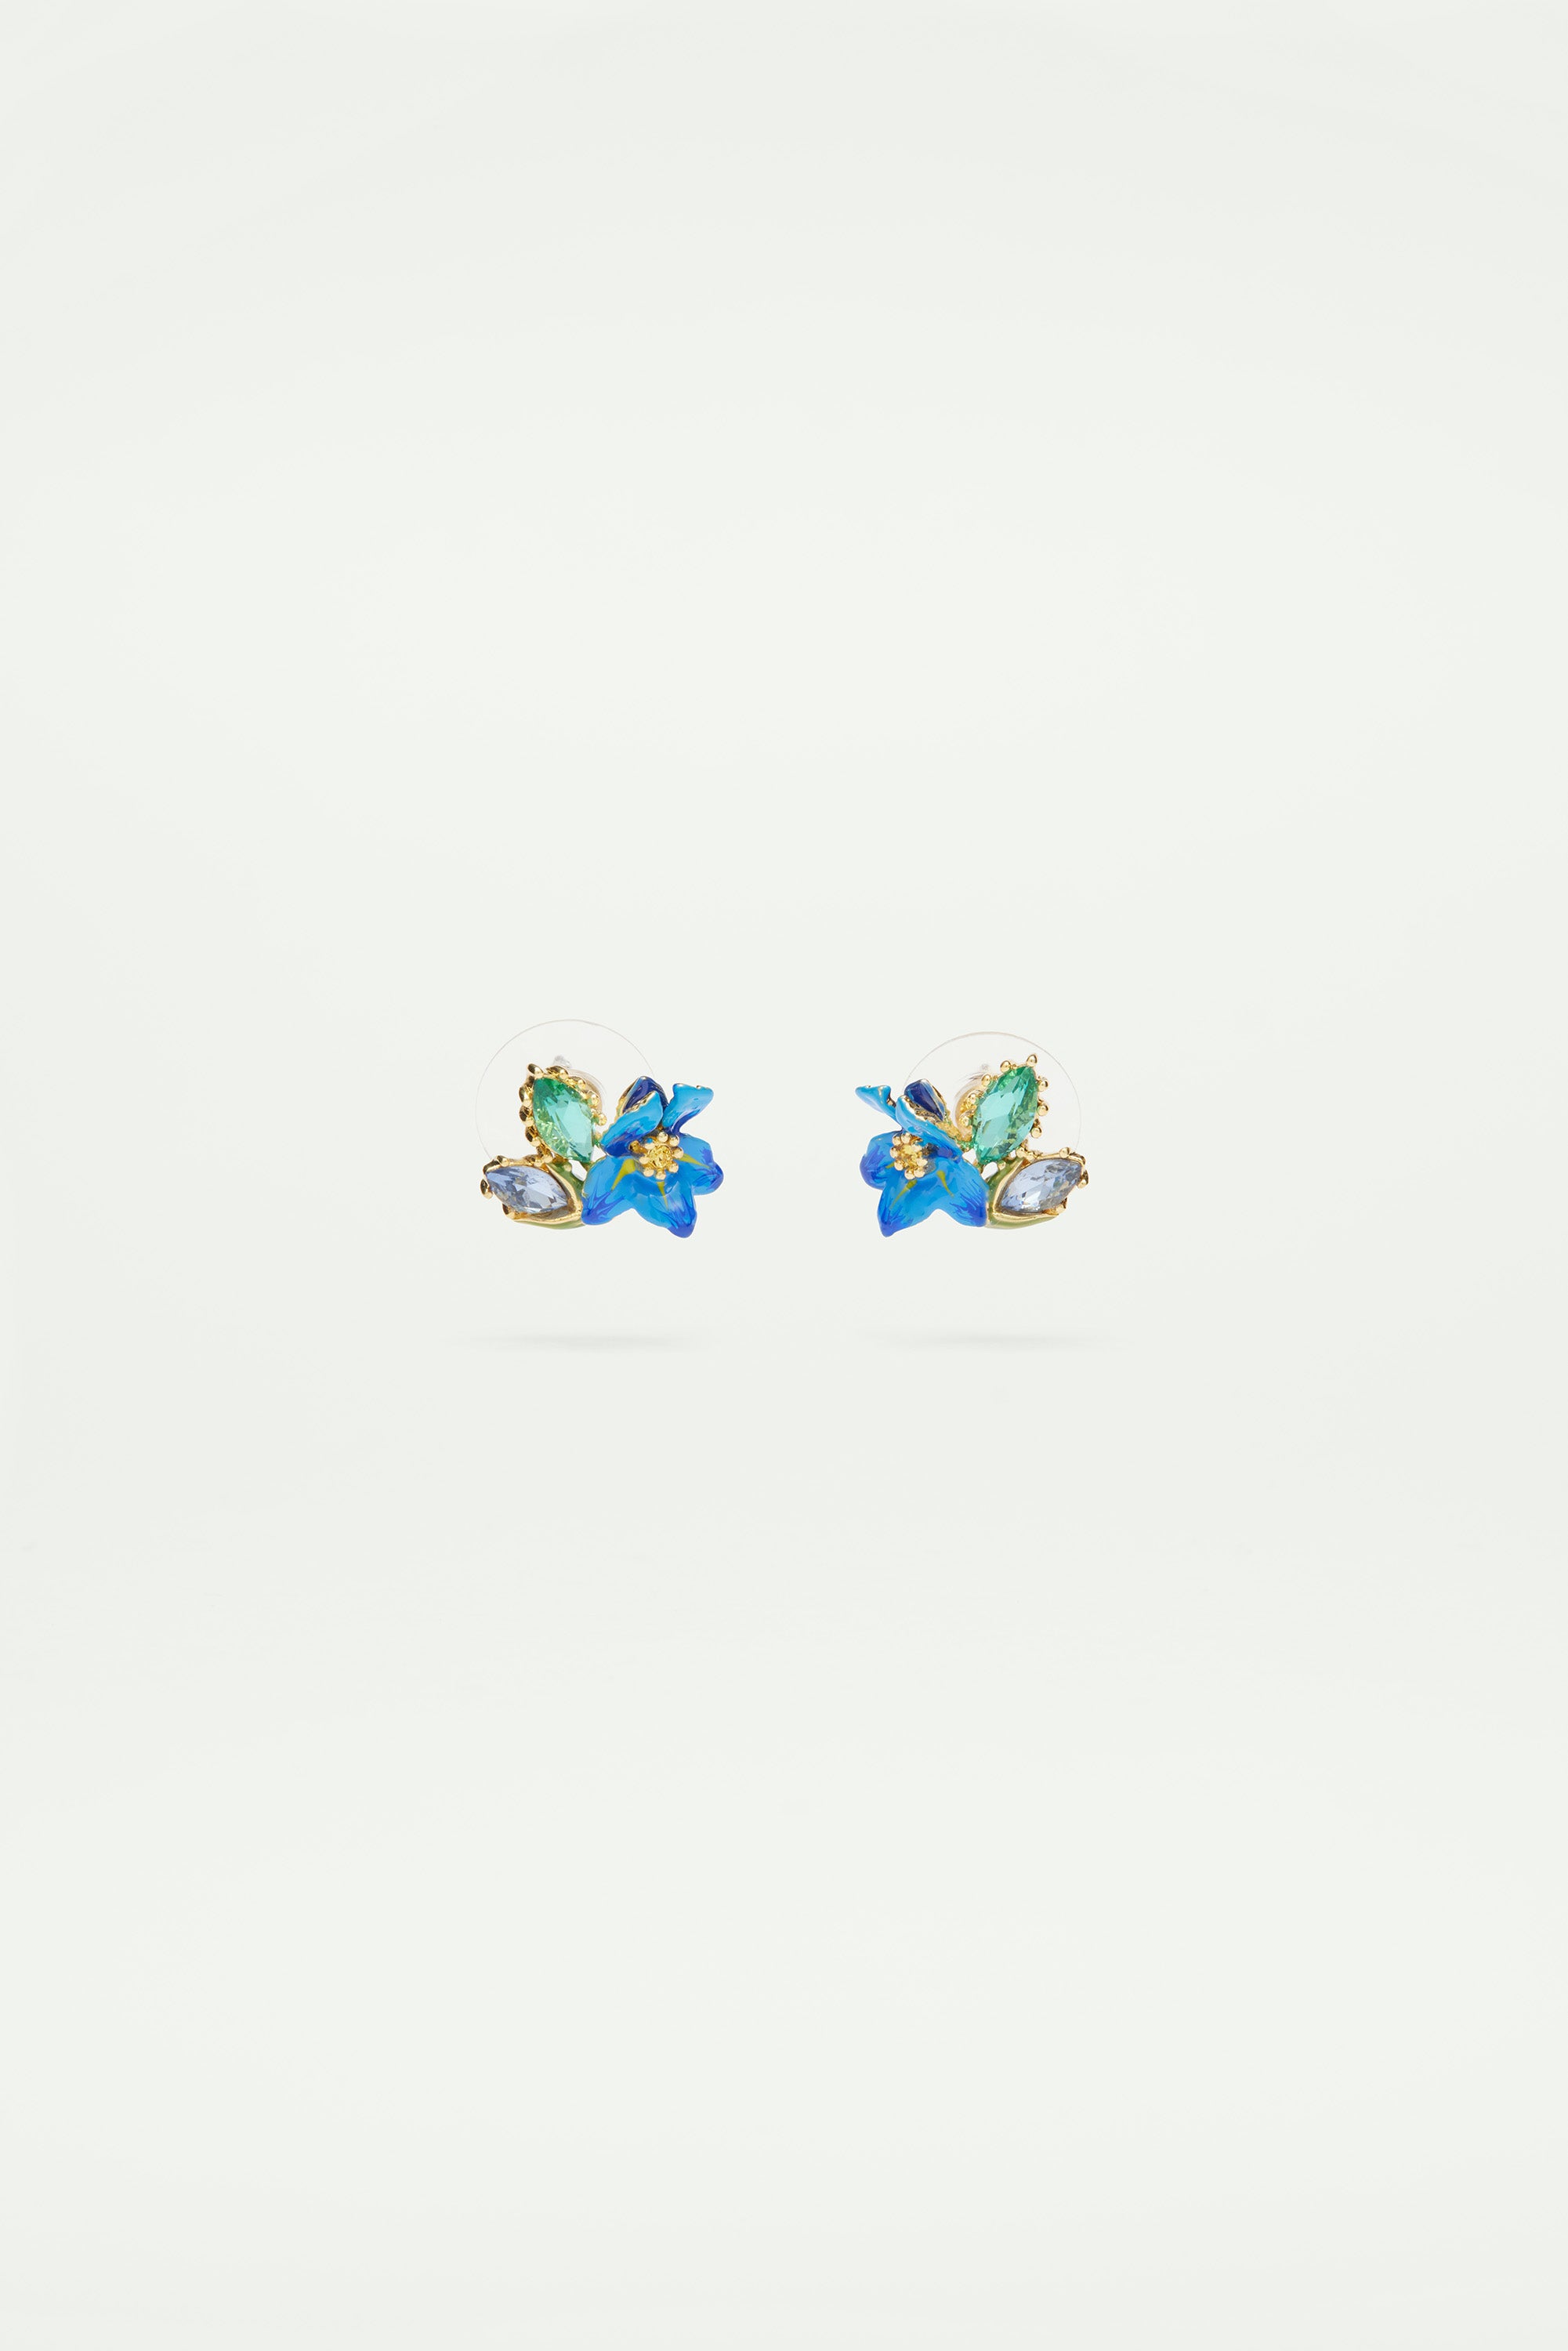 Siberian Iris and faceted glass post earrings